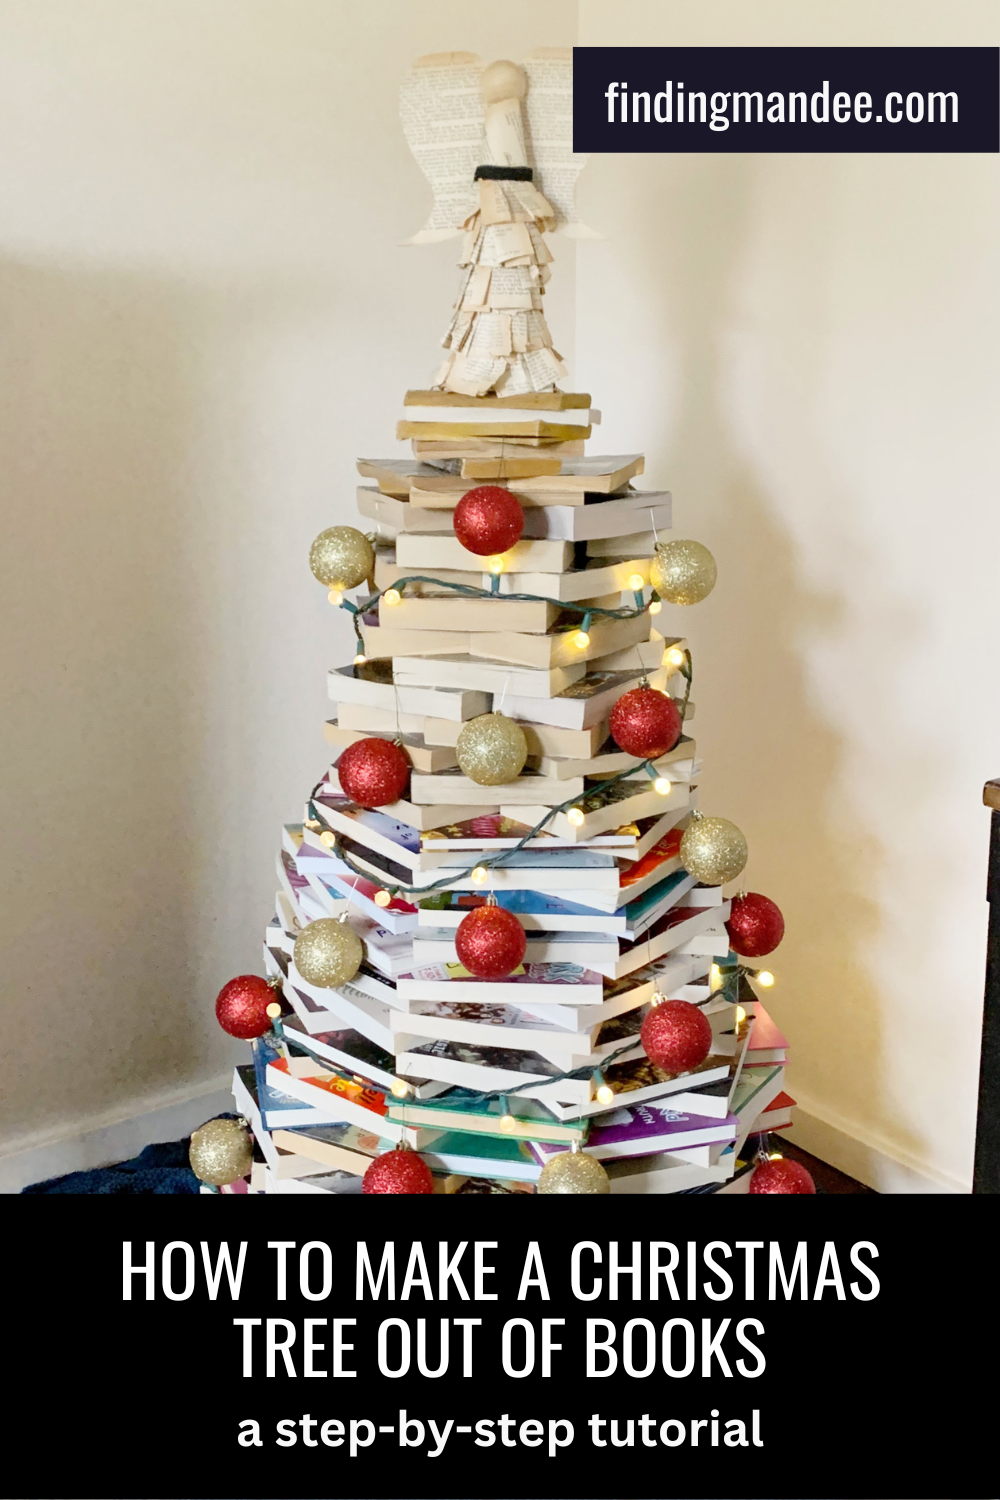 How to Make a Christmas Tree Out of Books | Finding Mandee